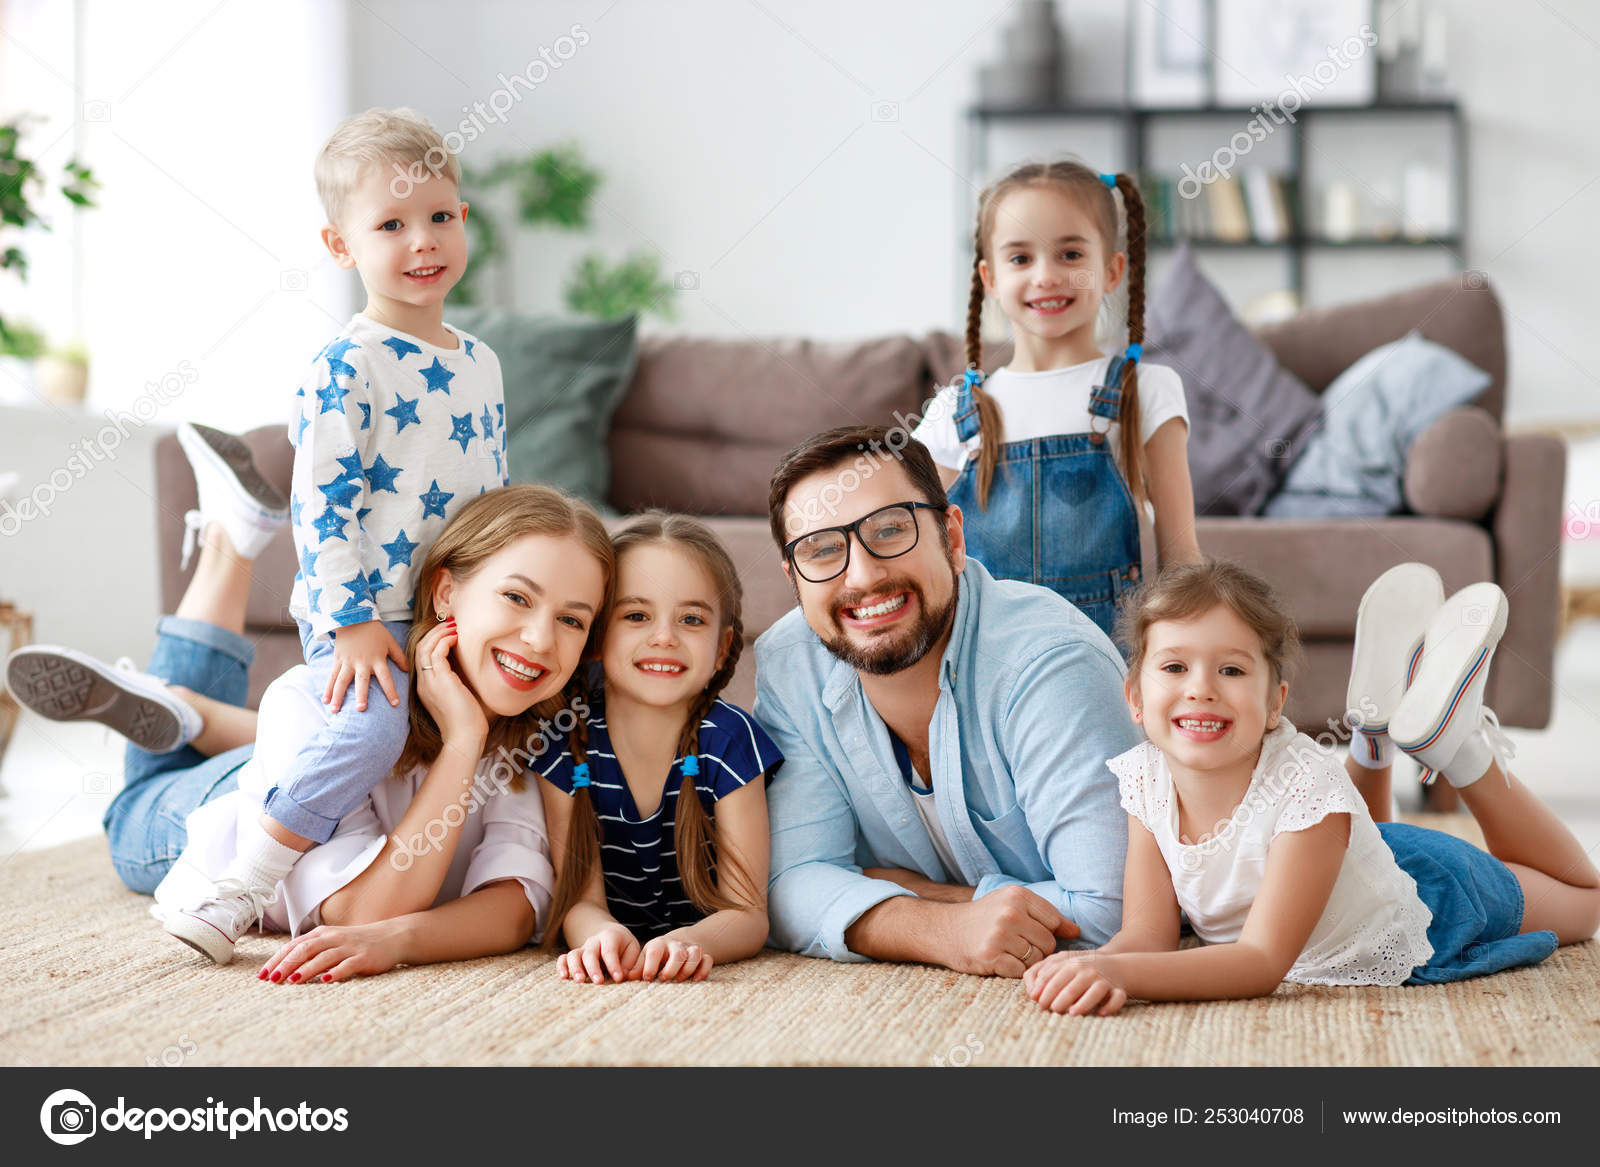 Big family Stock Photos, Royalty Free Big family Images ...